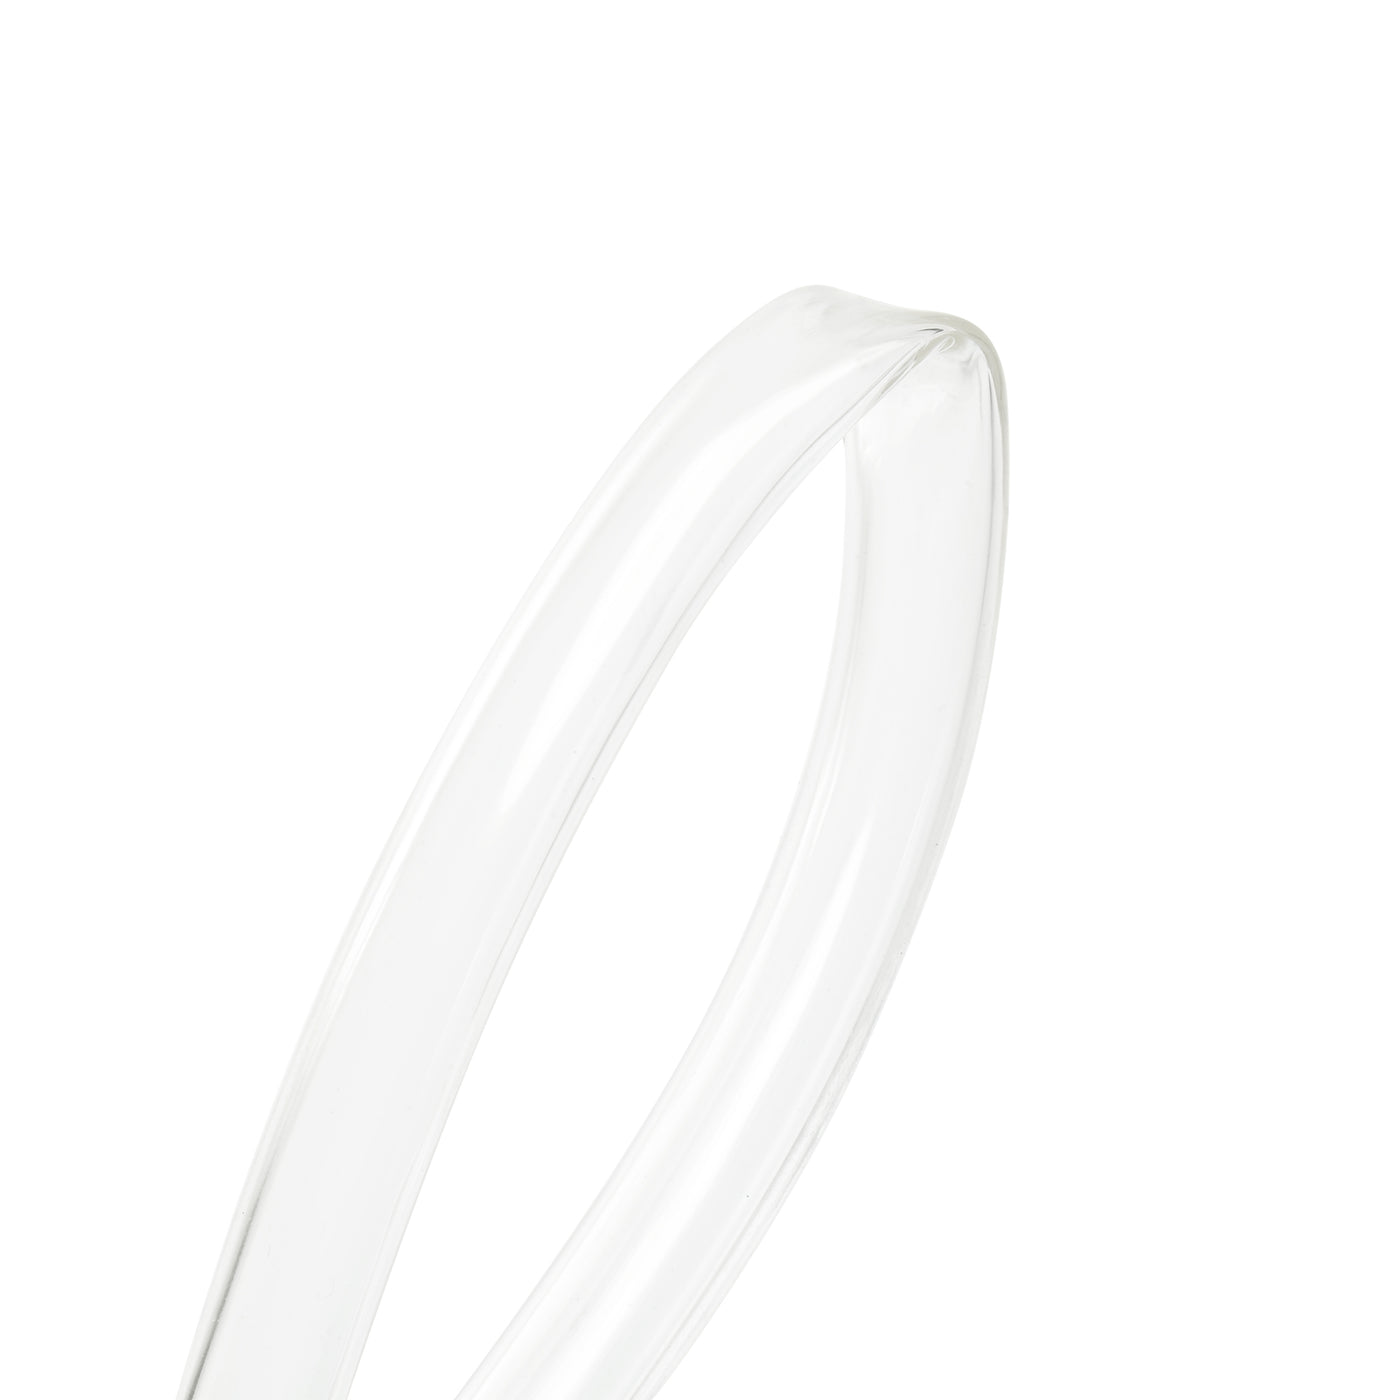 Uxcell Uxcell PVC Clear Vinyl Tubing, 10mm(3/8") ID 13mm(1/2") OD 10ft Plastic Pipe Air Water Hose with Clamps